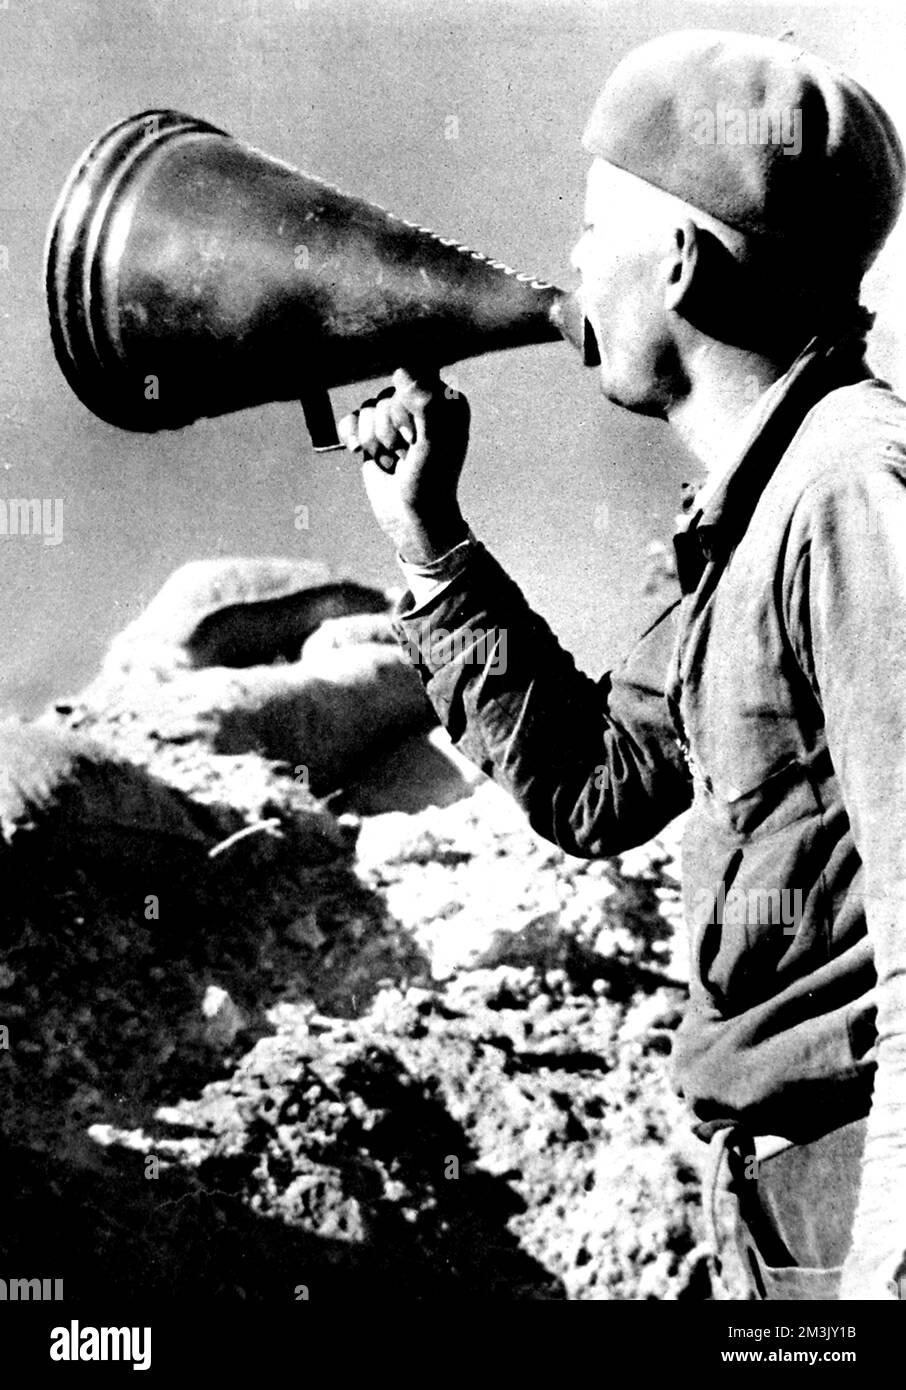 Photograph showing a Cuban soldier of the Abraham Lincoln Battalion, International Brigade, using a megaphone to implore Nationalist troops to join the Republican cause, 1937.      The International Brigade was a volunteer force which supported the Republican Government during the Spanish Civil War.  Volunteers came from all over Europe and North America; the Abraham Lincoln Battalion had men from Cuba, Mexico, the Philippines, Canada and the USA.     Date: 1937 Stock Photo